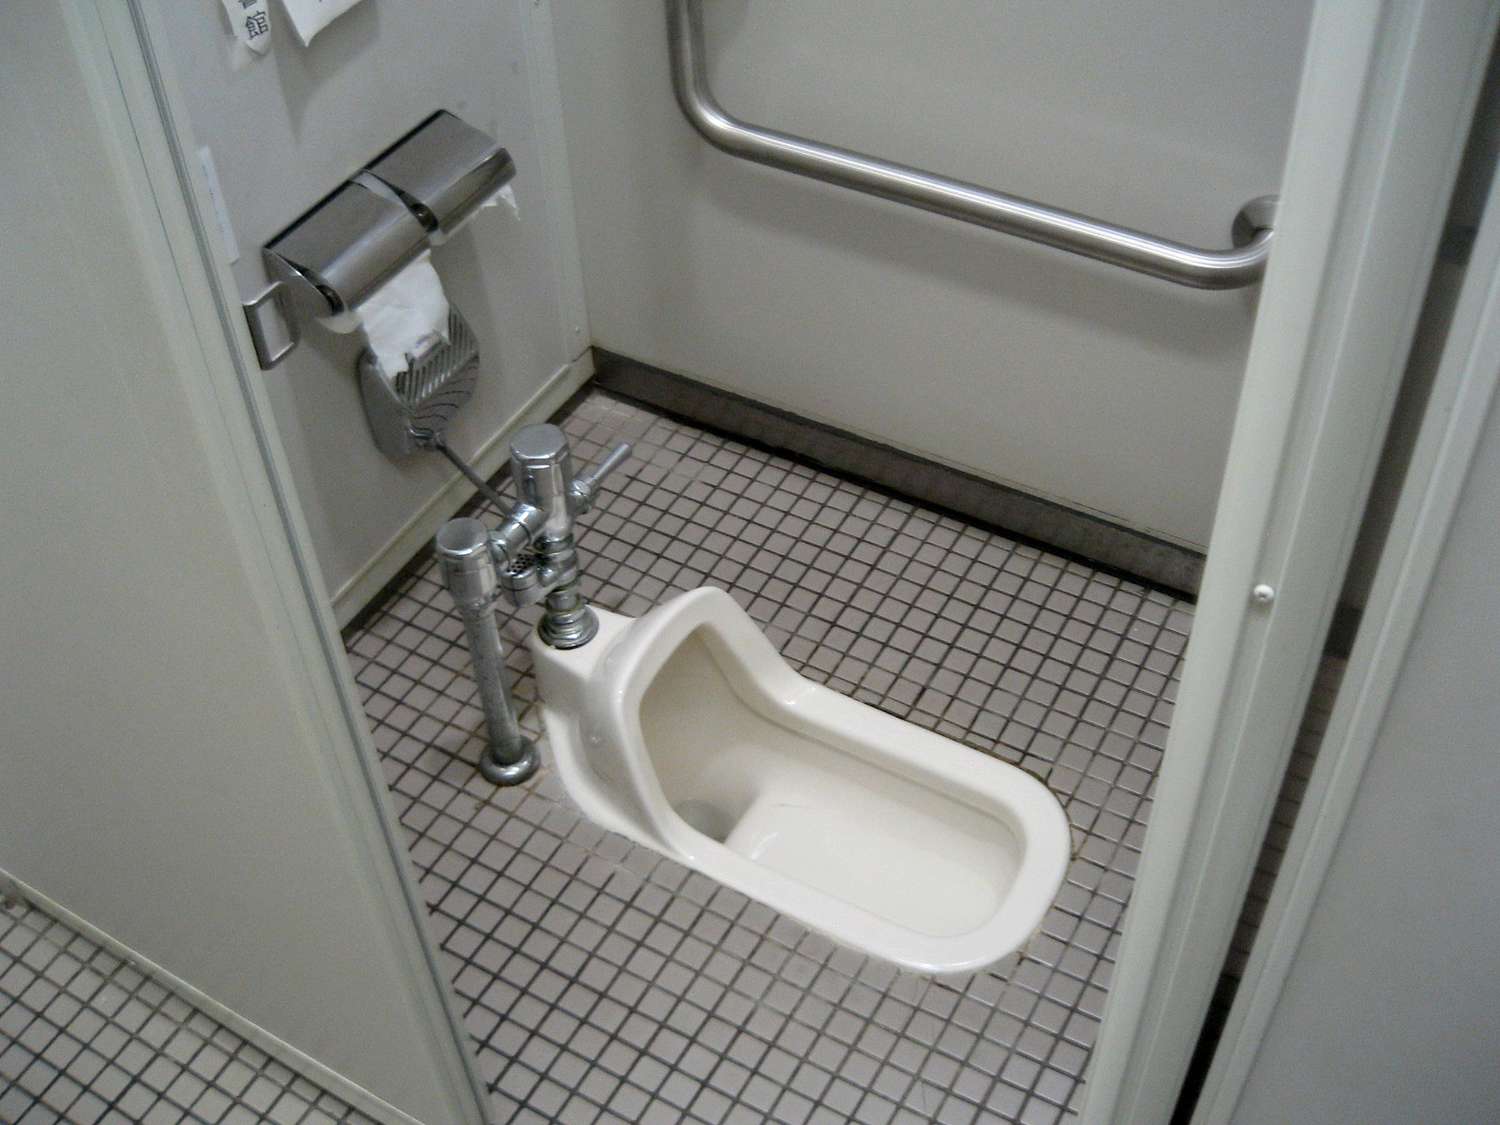 How To Use Squat Toilet